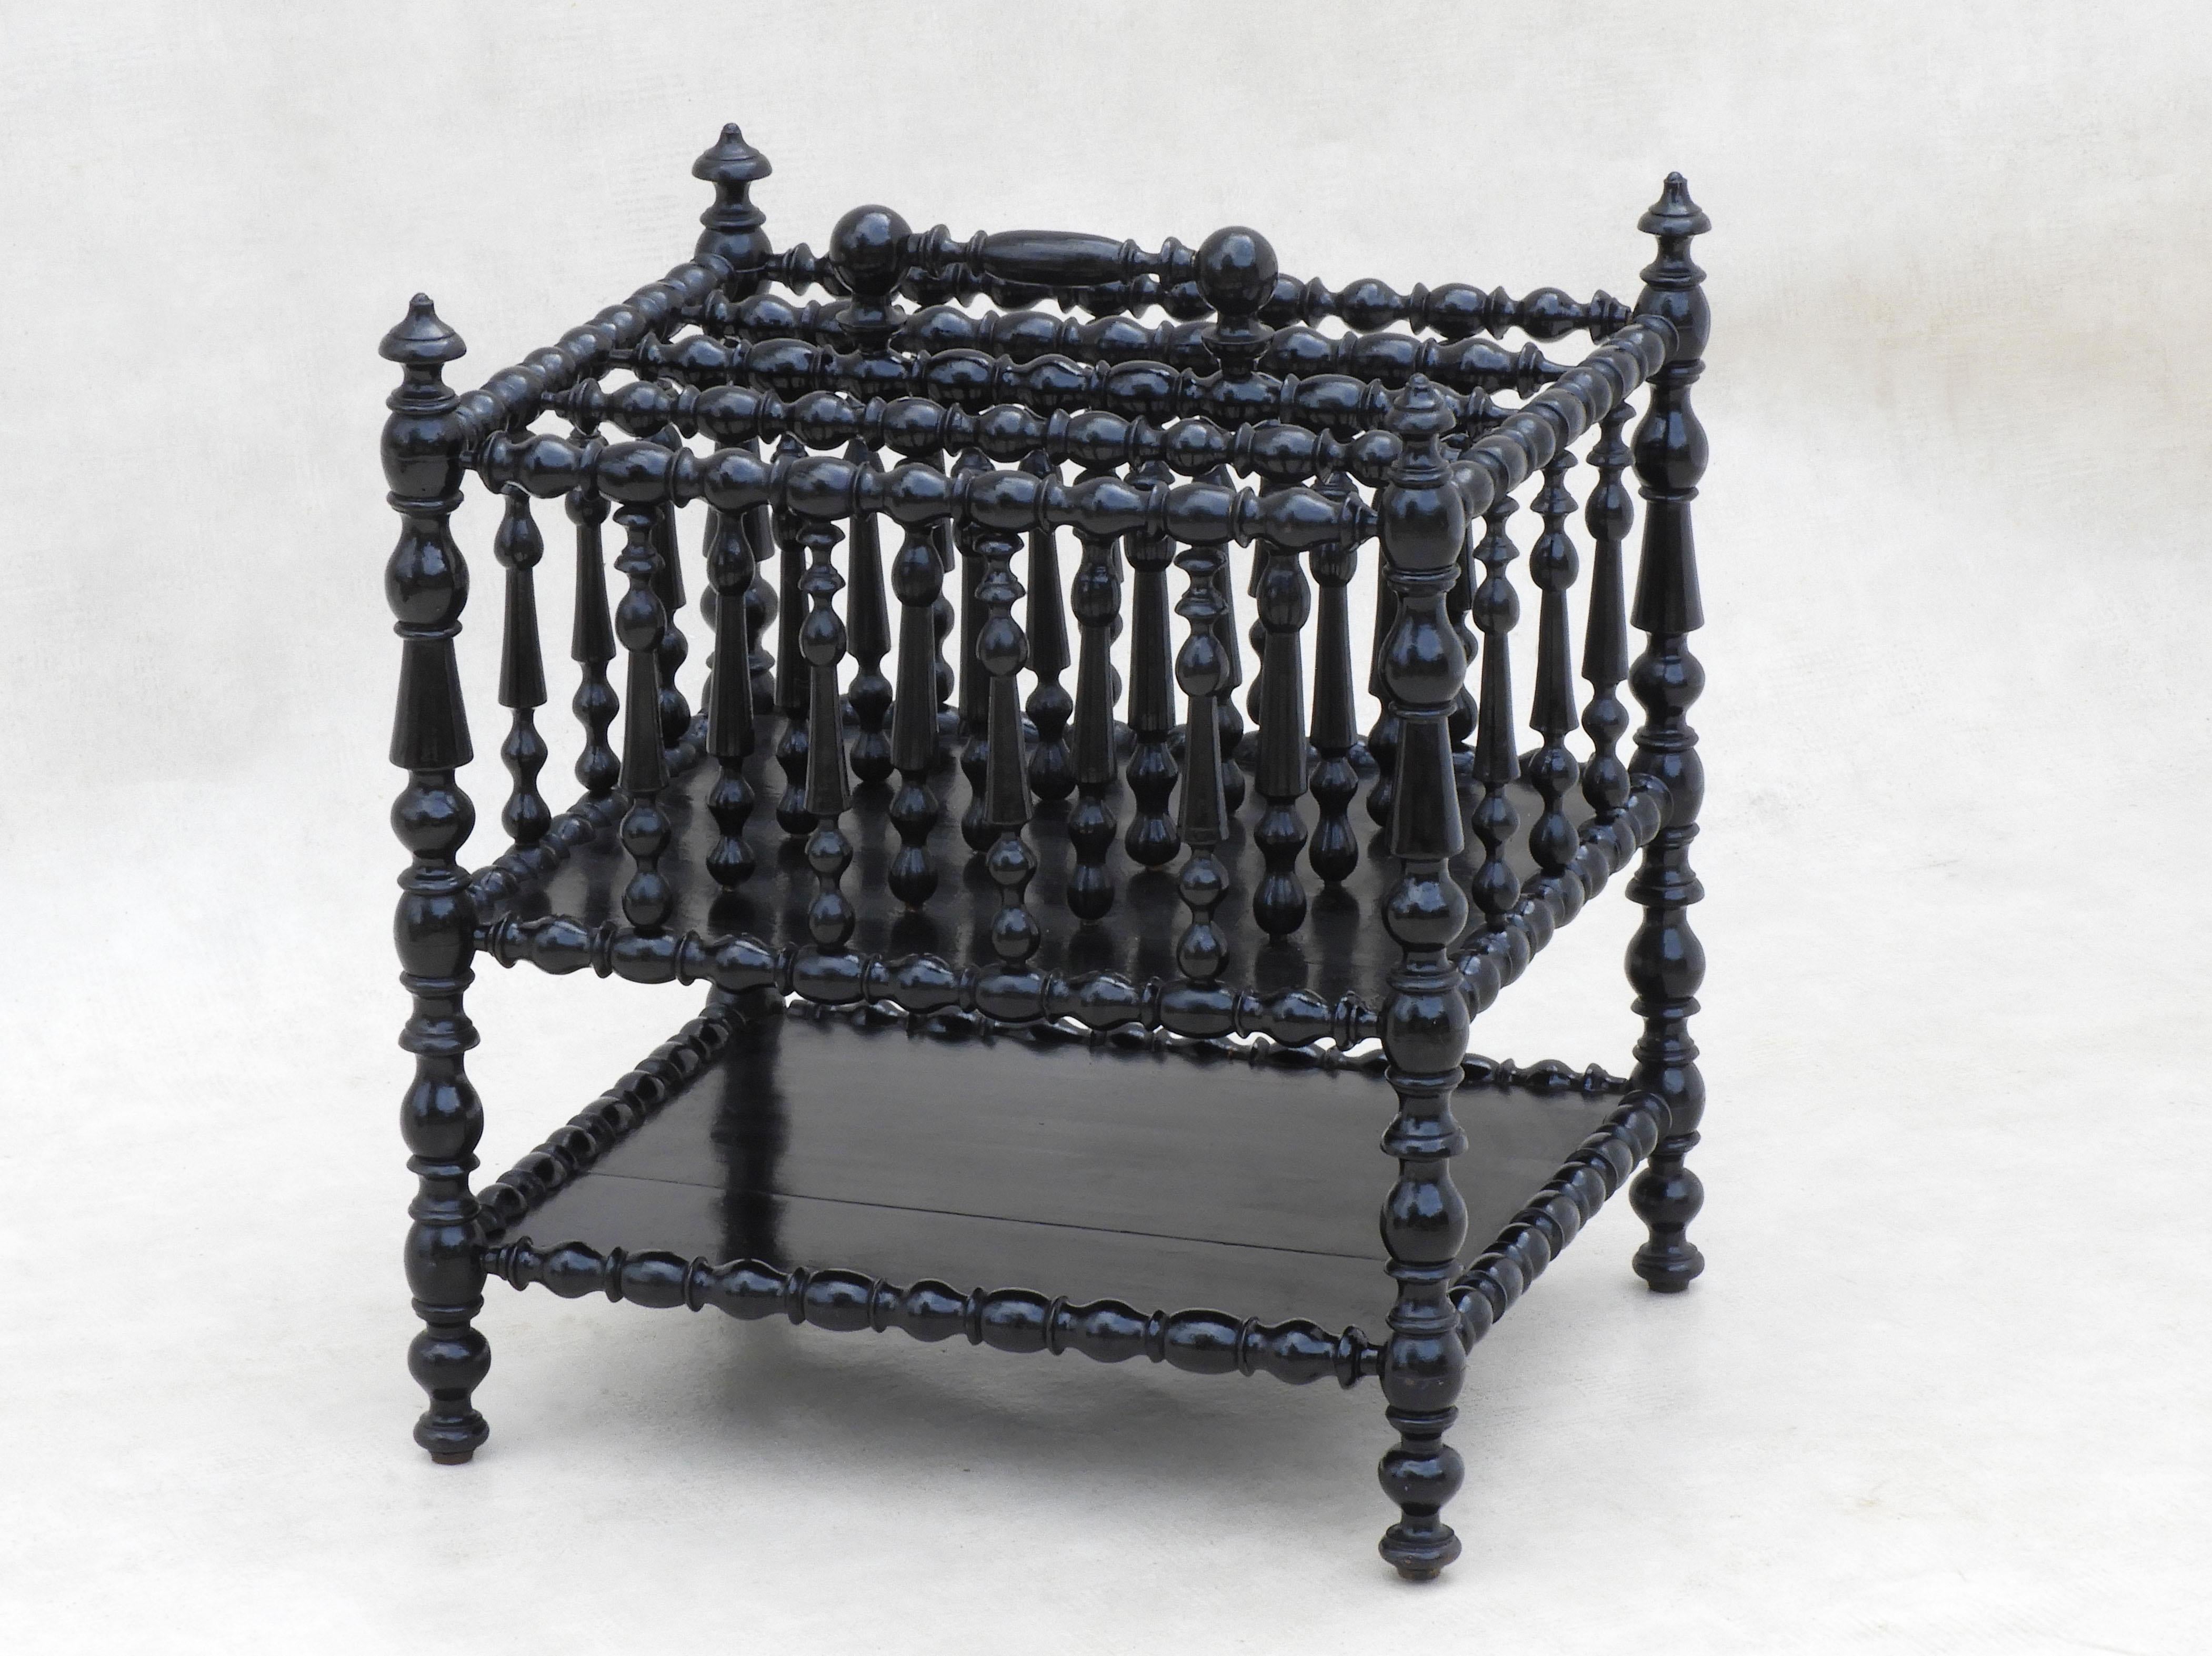 Stylish French Napoleon III 'porte revue' magazine rack or canterbury. Black lacquered and beautifully turned wood, this 
four-sectioned stand with an undershelf, and carrying that handle, will work well within a diverse range of interior styles.